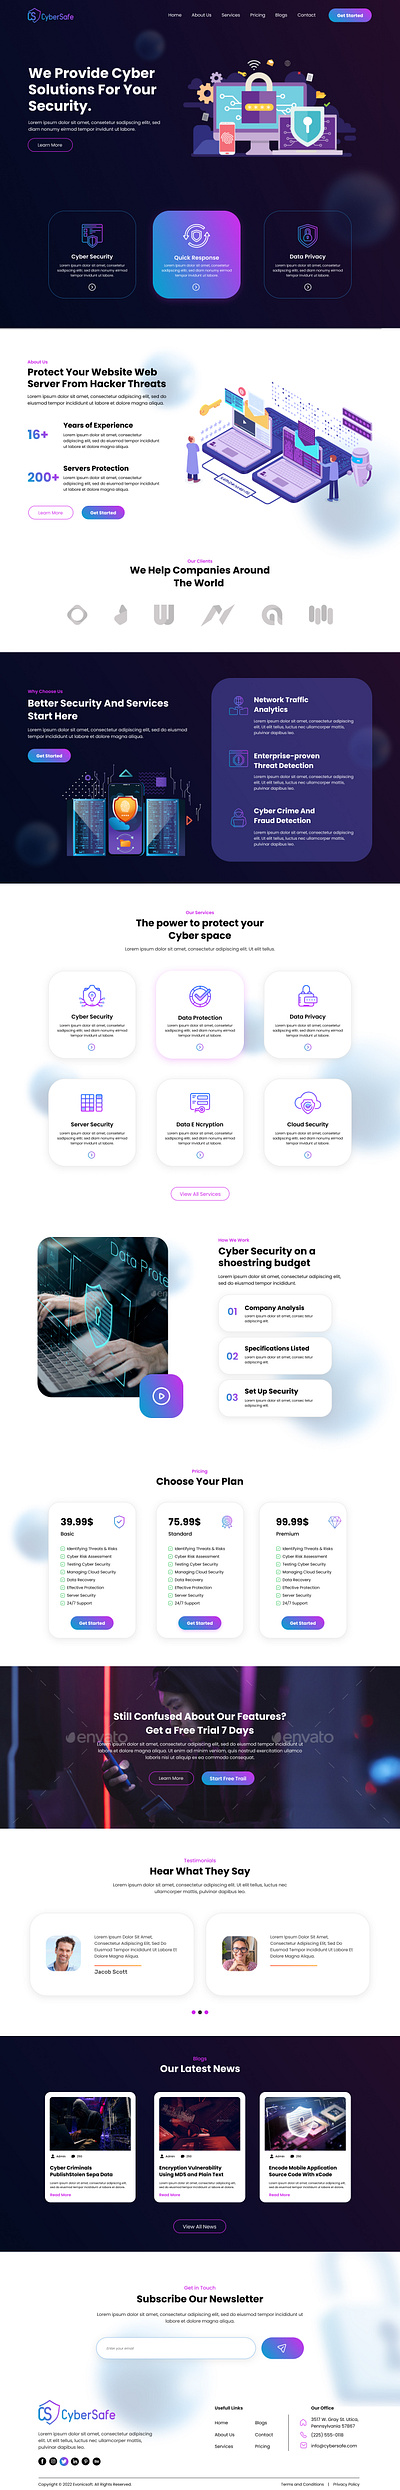 CyberSafe - Cyber Security Service Elementor Template Kit branding cyber security design idea graphic design internet security online privacy security software security solution telecom security ui ux web protection website